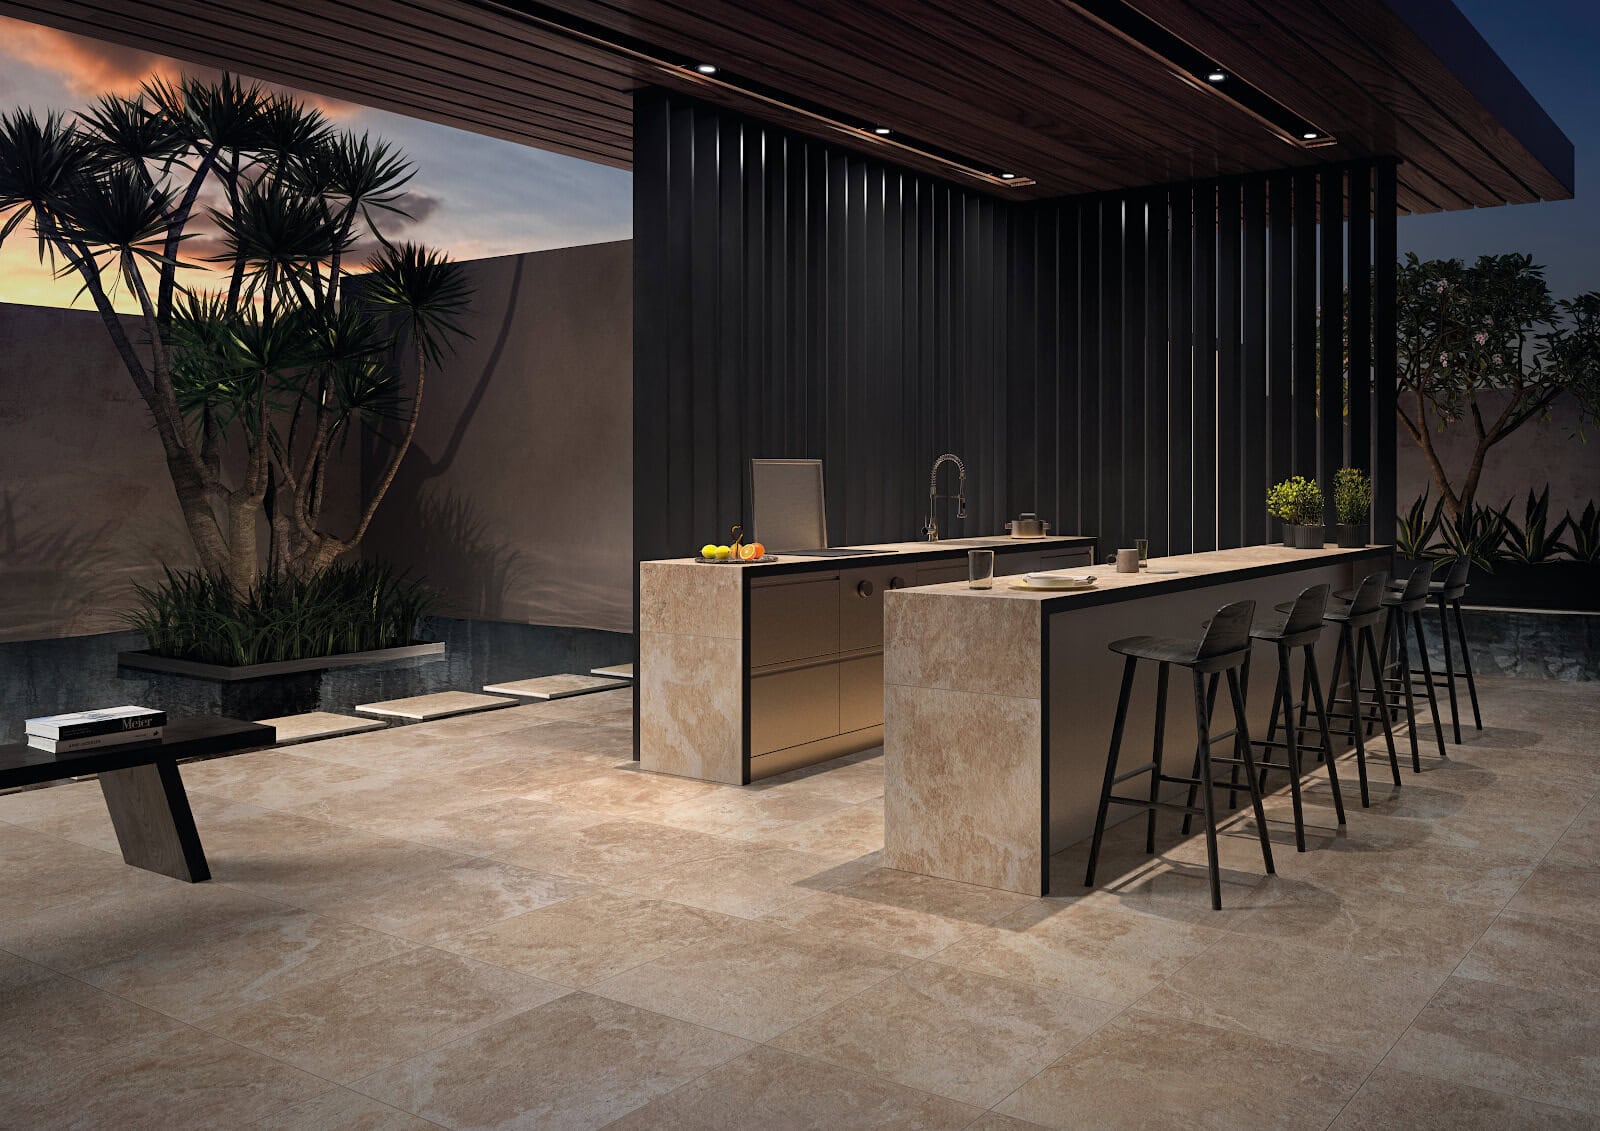 An open, outdoor kitchen with stone-look tile countertops and floors.